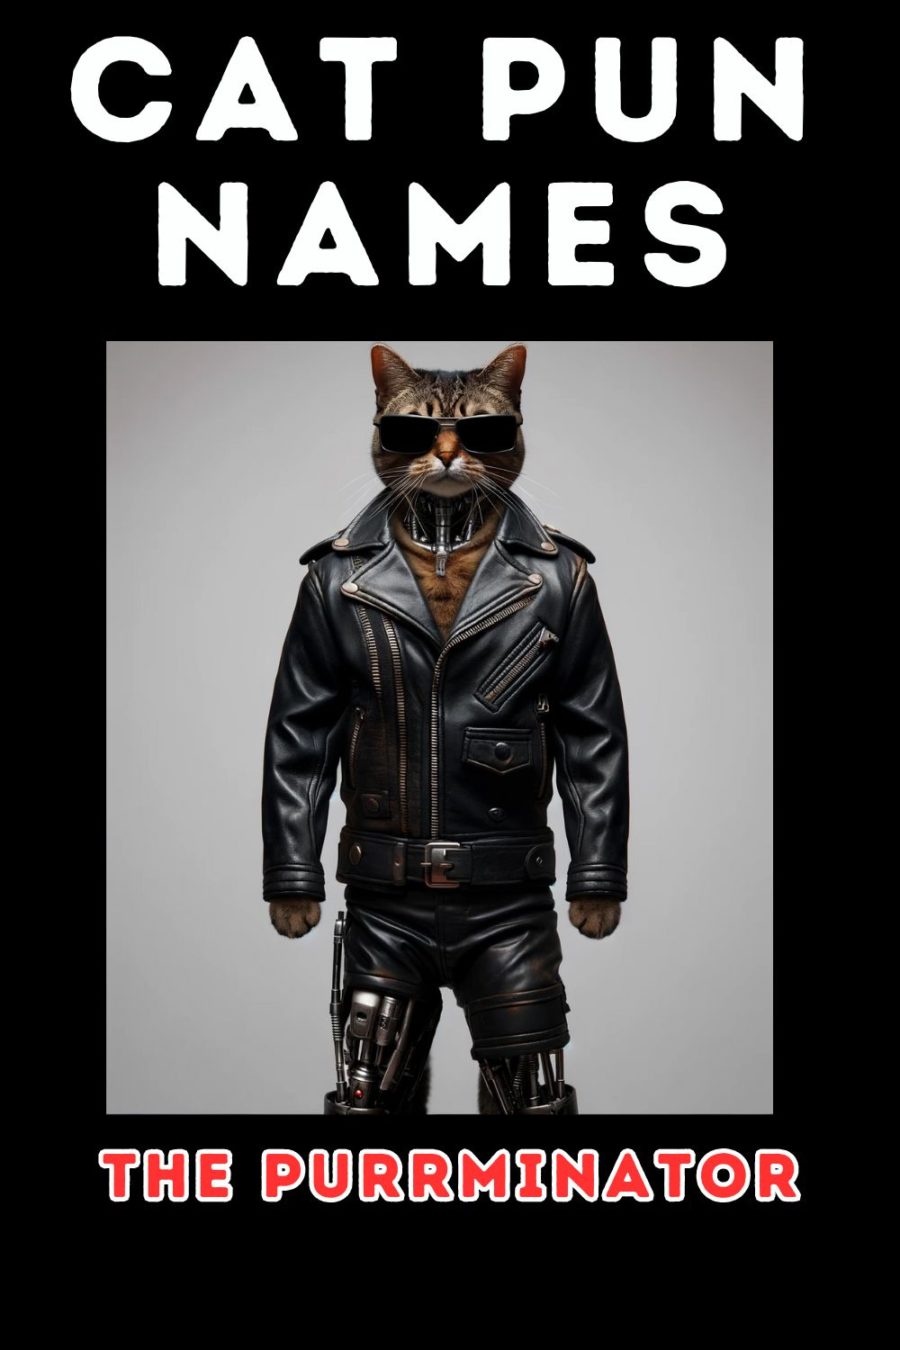 cat wearing leather motorcycle suit and sunglasses in take from the Terminator. Words Cat Pun Names at top of image and The Purrminator at bottom of image